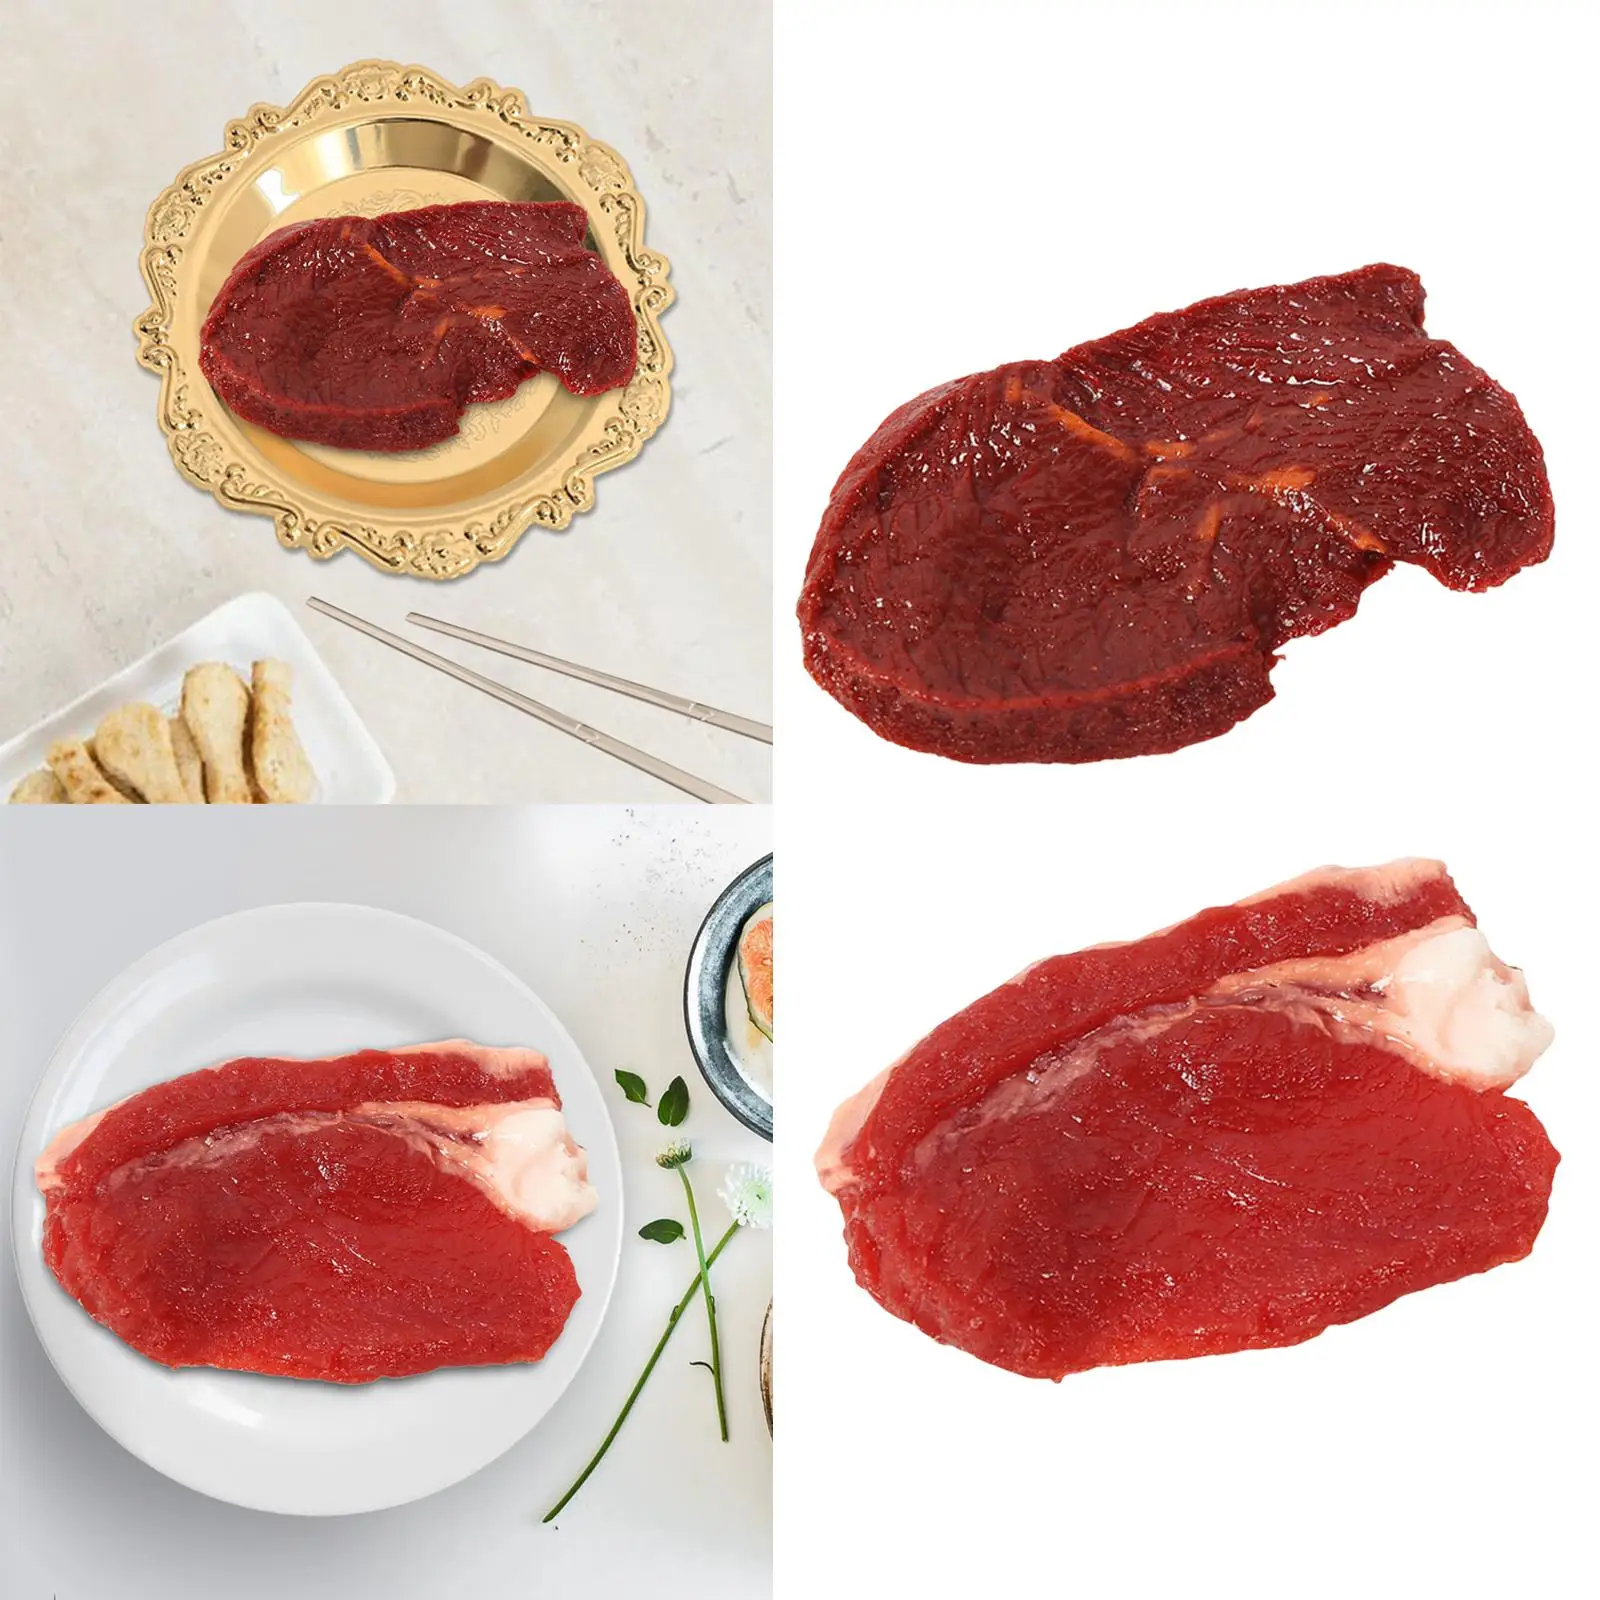 Realistic Simulation Meat Lifelike Fake Cooked Meat Meat Model for Cabinet Desk Home Party Displaying Decor